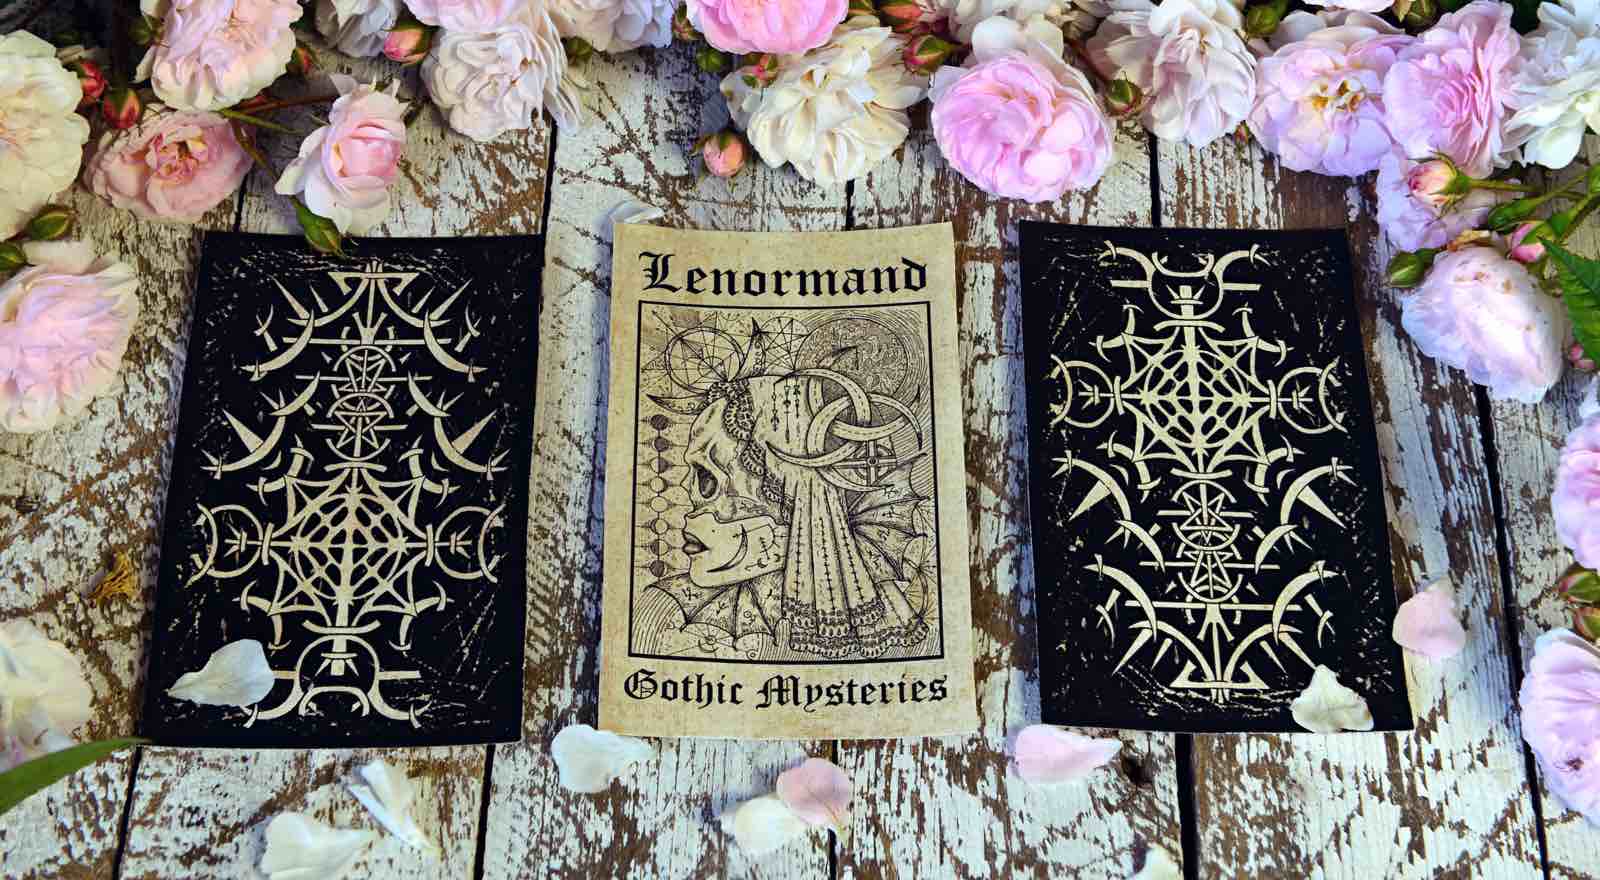 Learning Lenormand: Traditional Fortune Telling for Modern Life